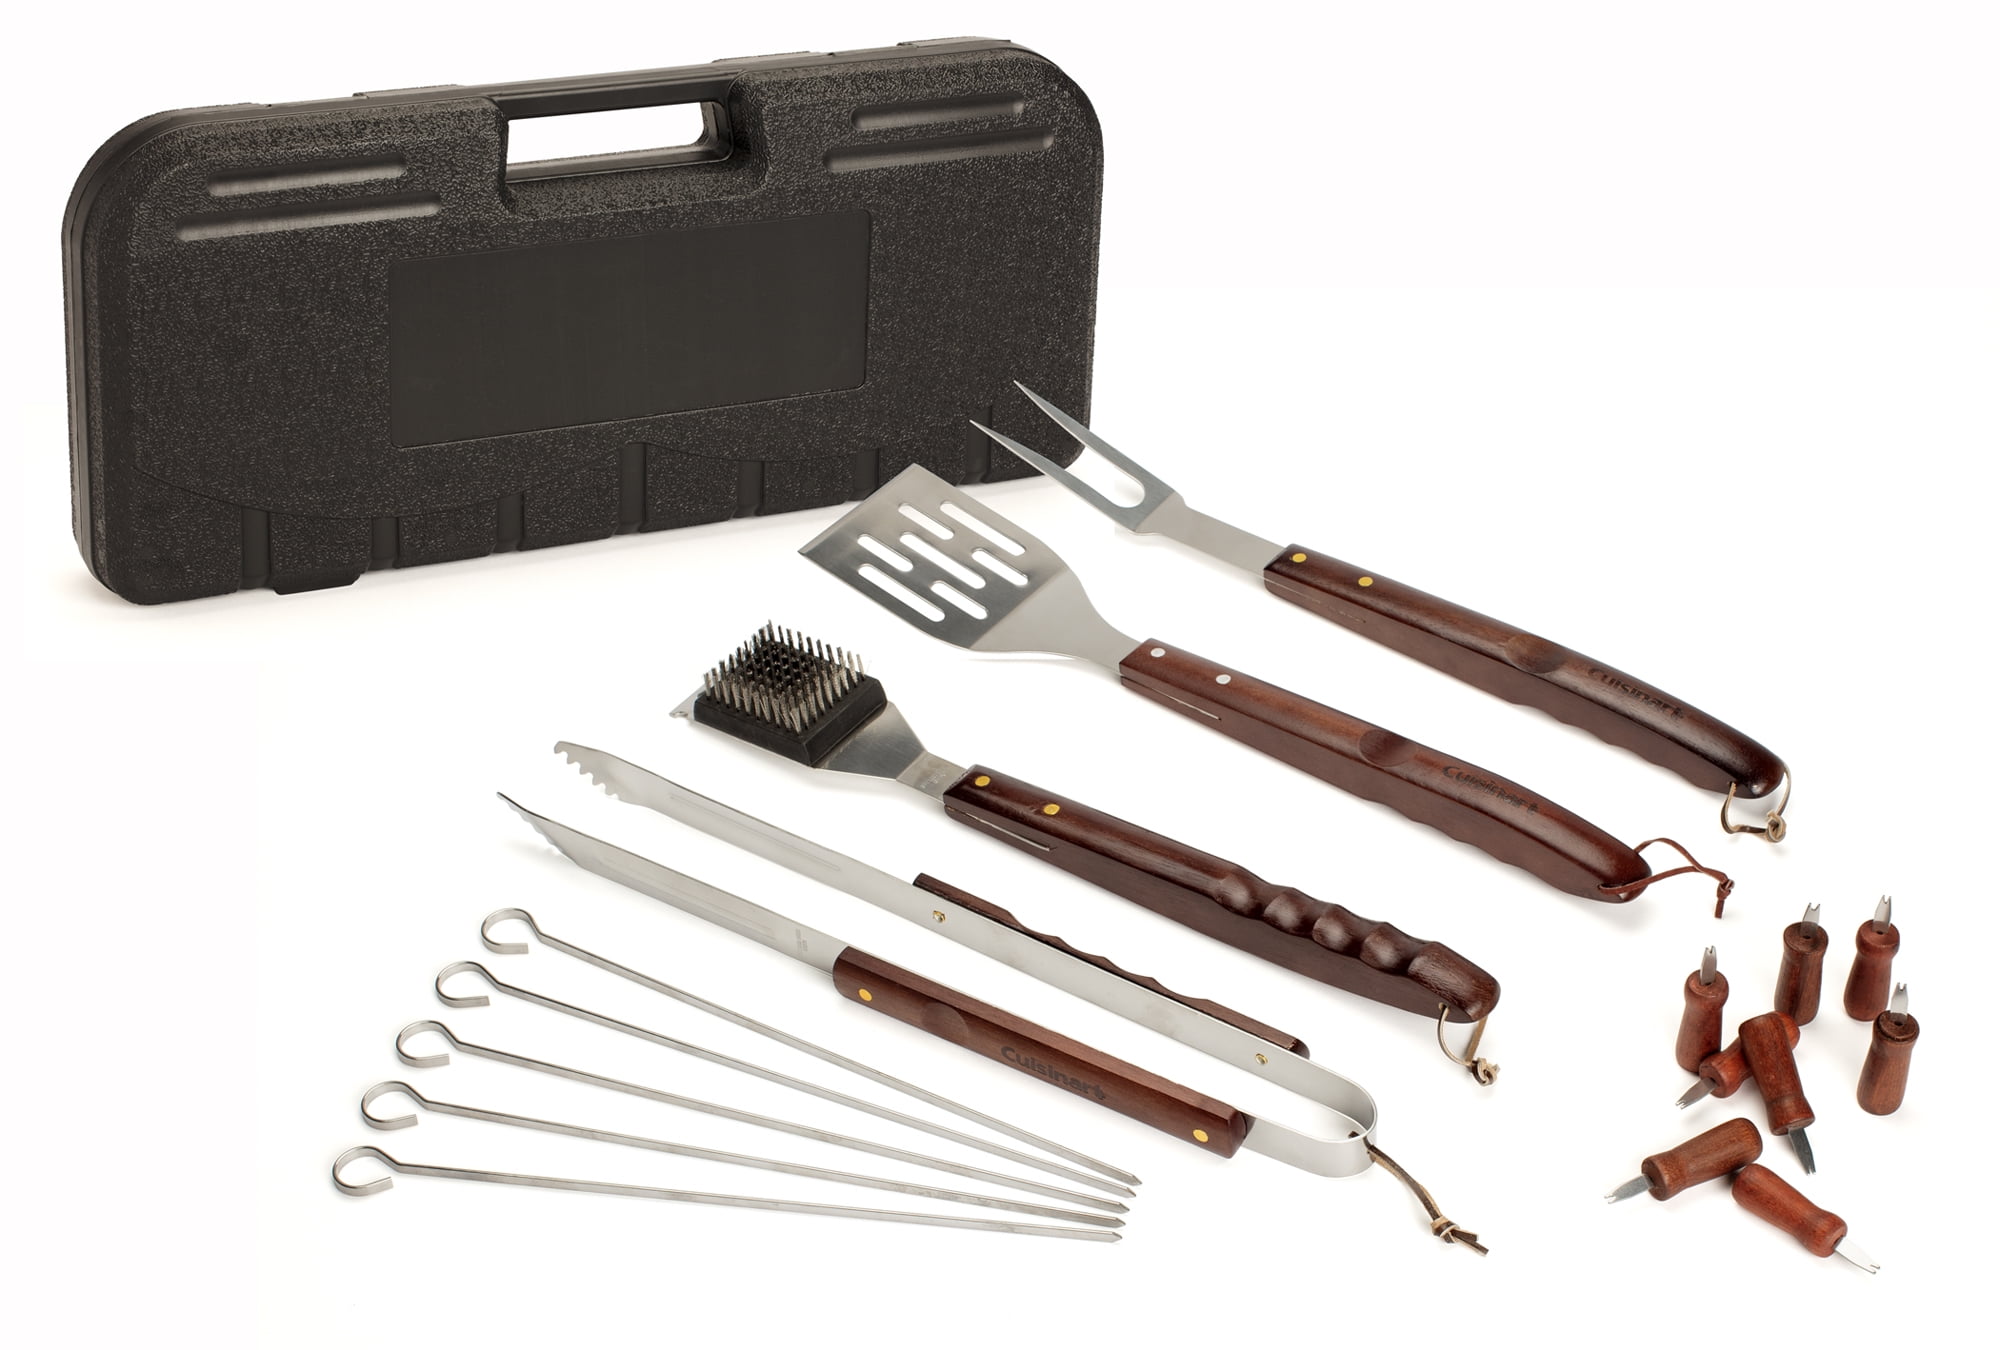 Cuisinart® 13-Piece Bamboo BBQ Tool Set - Tools Are Crafted From 